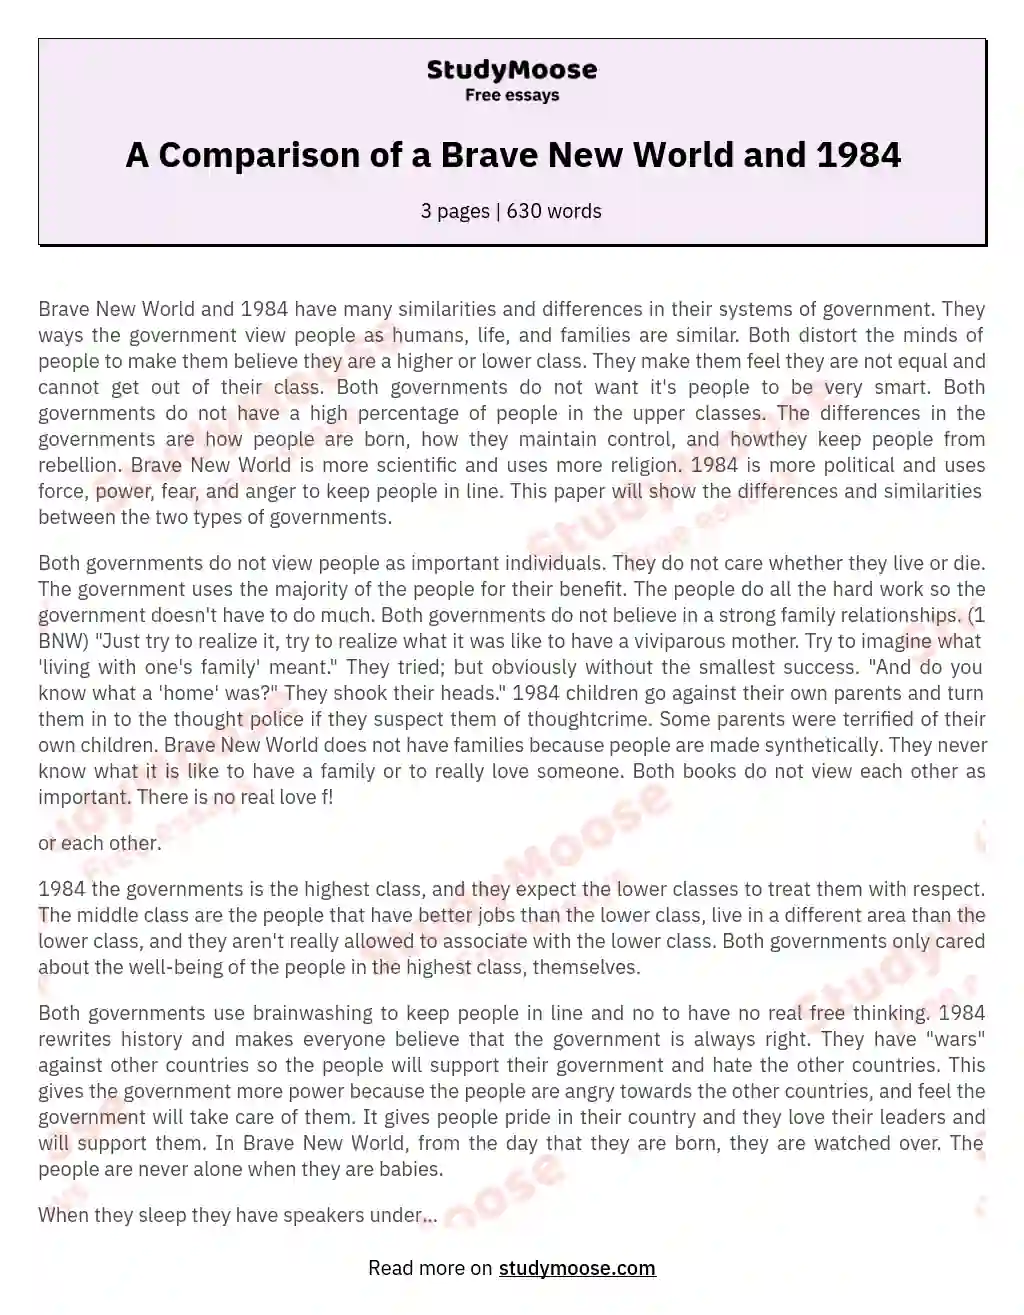 A Comparison of a Brave New World and 1984